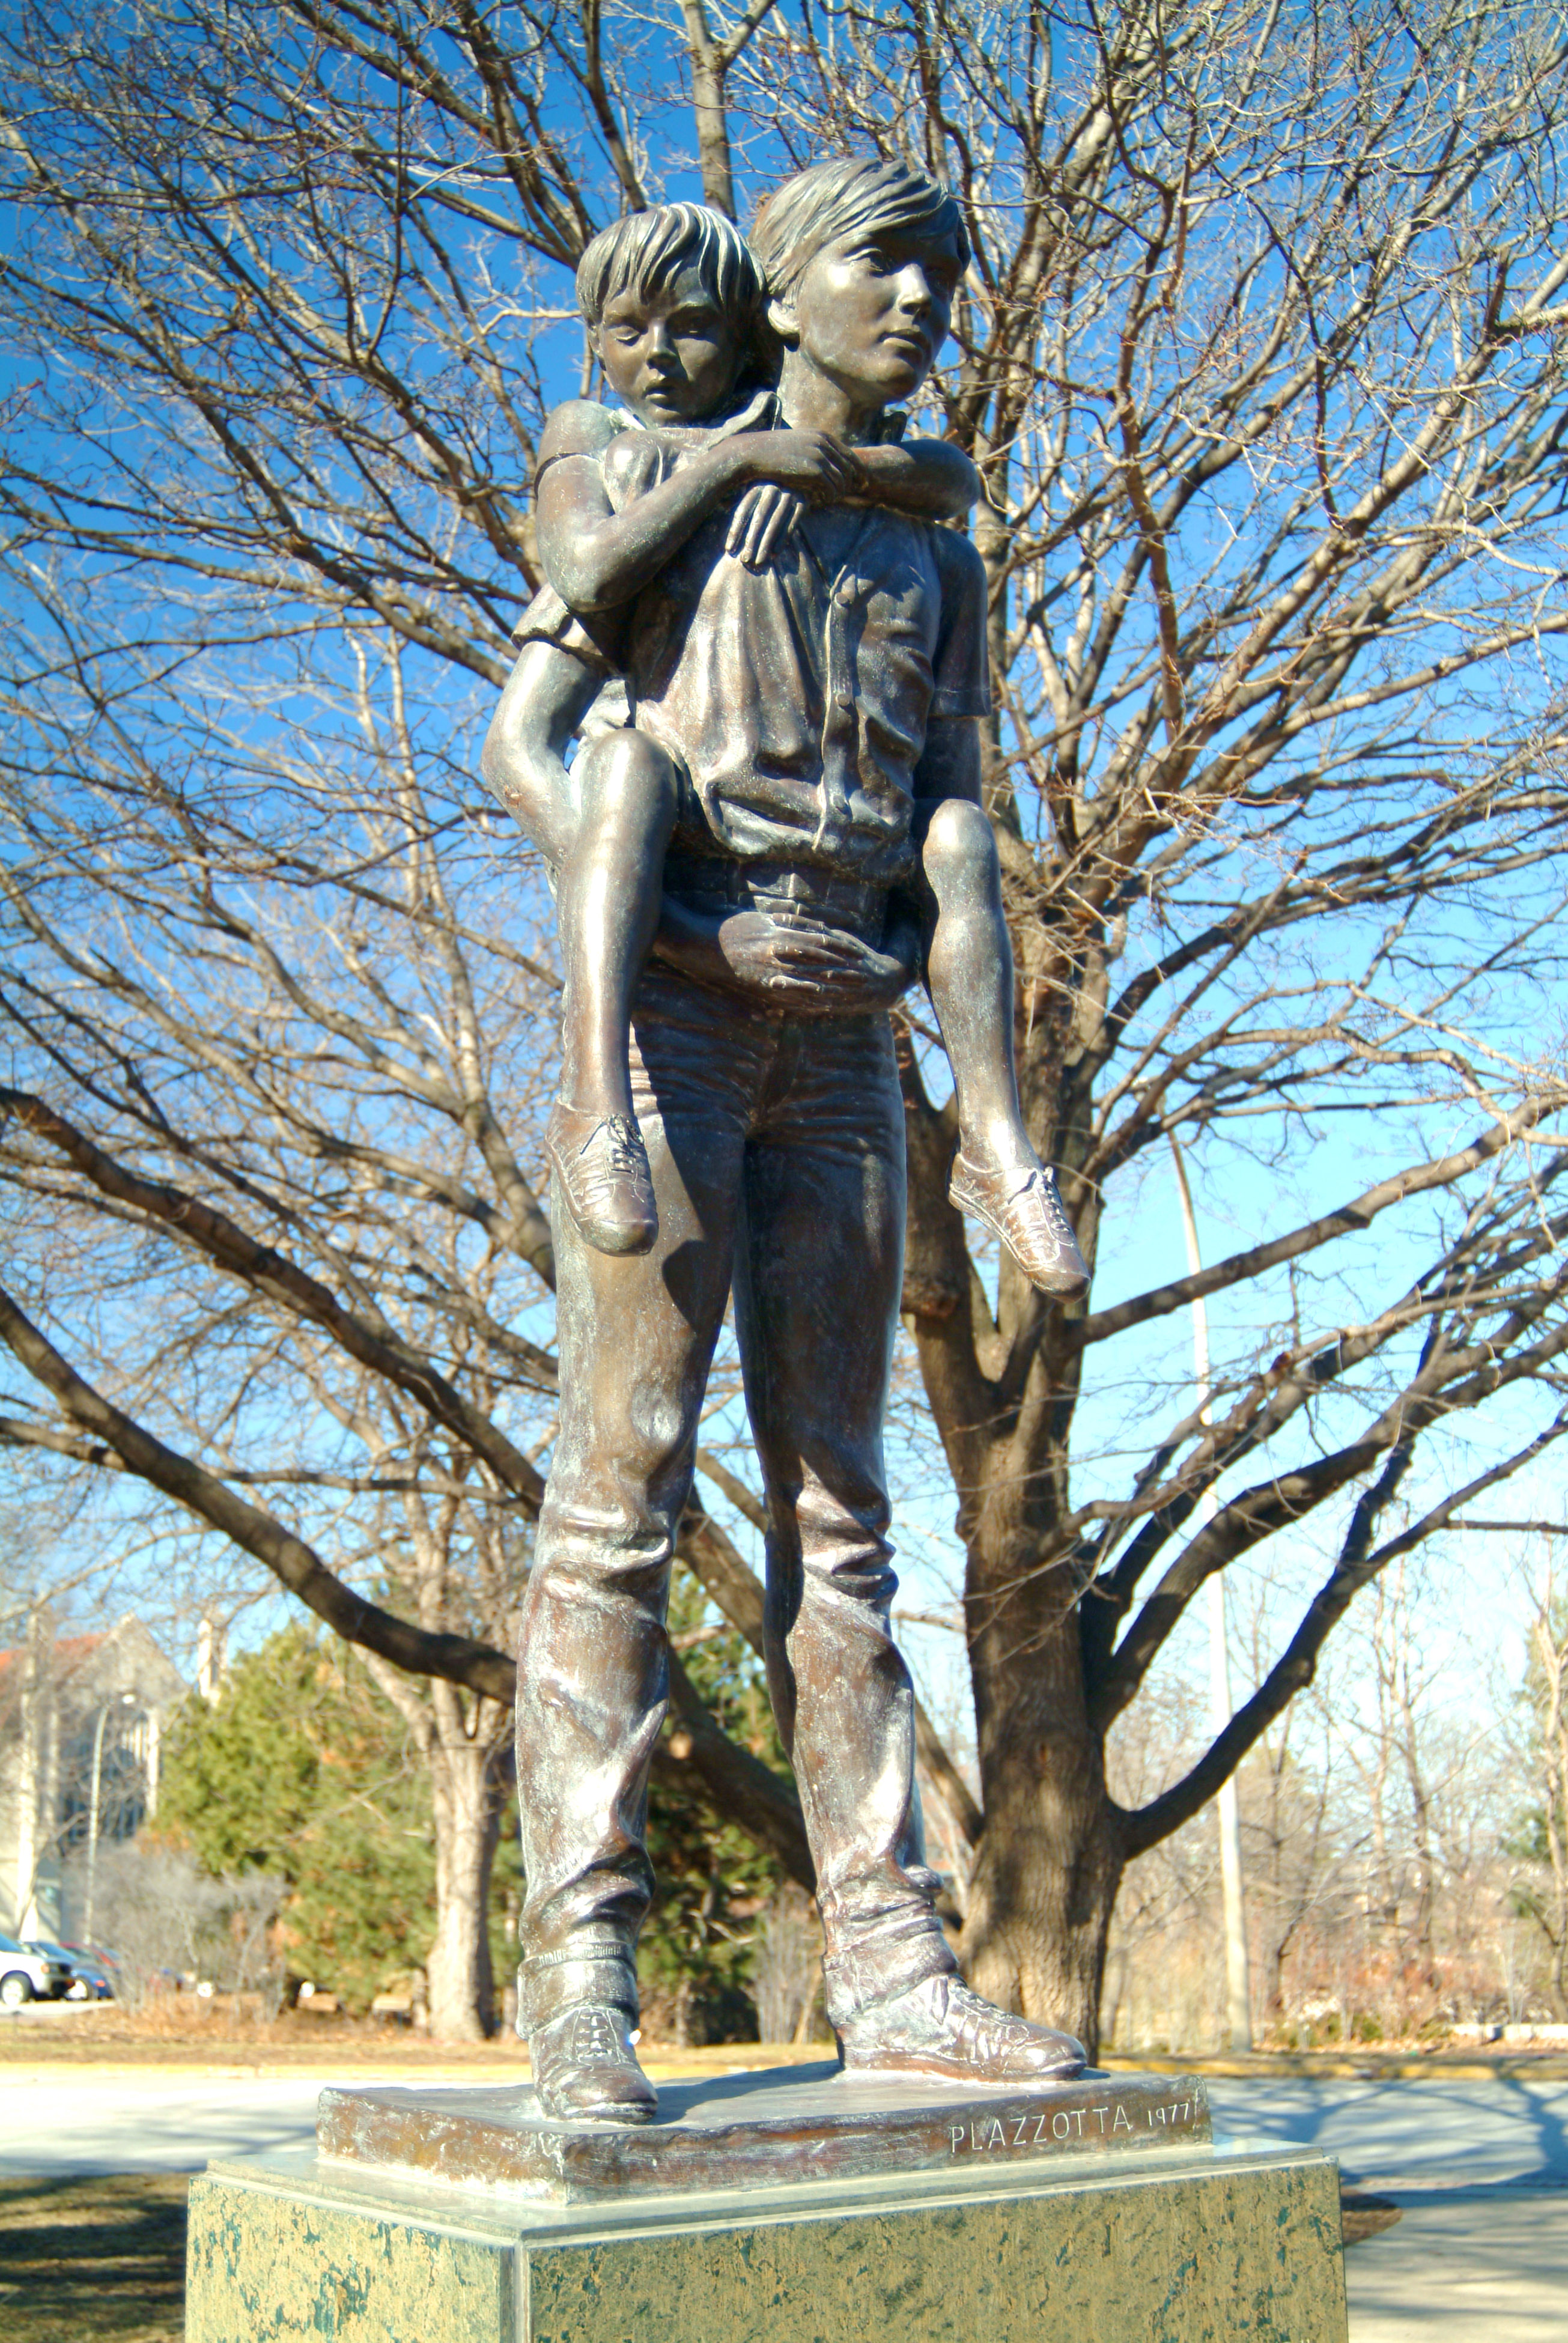 Boys Town’s motto, “He ain't heavy, Father, he’s my brother,” inspired 
this statue